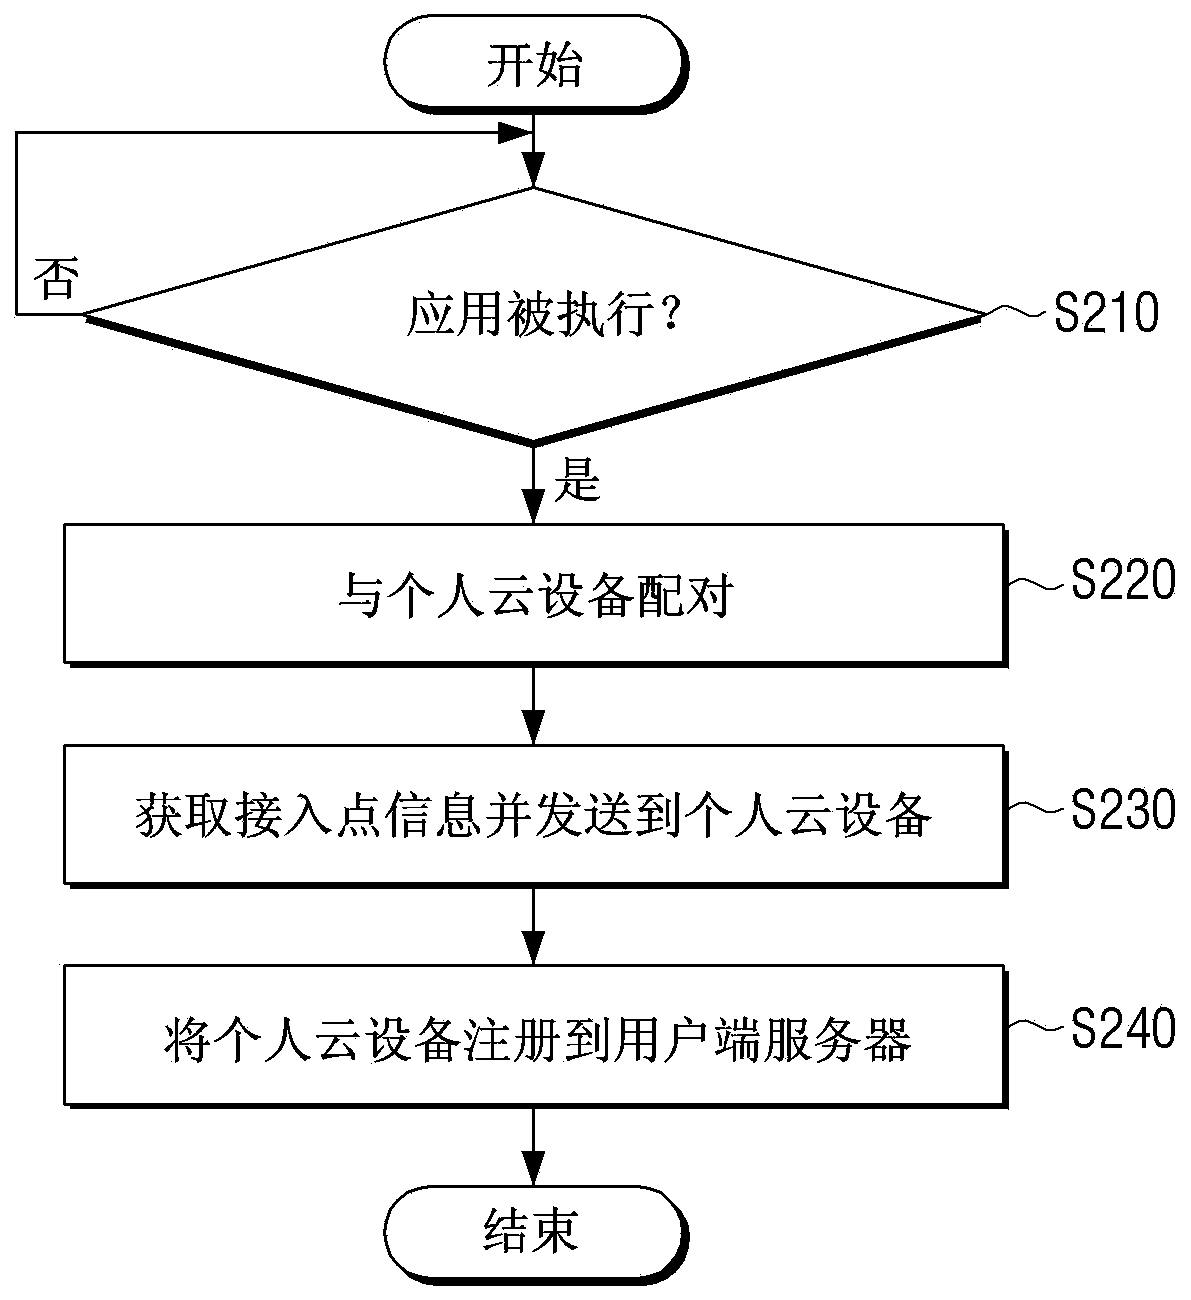 Electronic device, personal cloud apparatus, personal cloud system and method for registering personal cloud apparatus